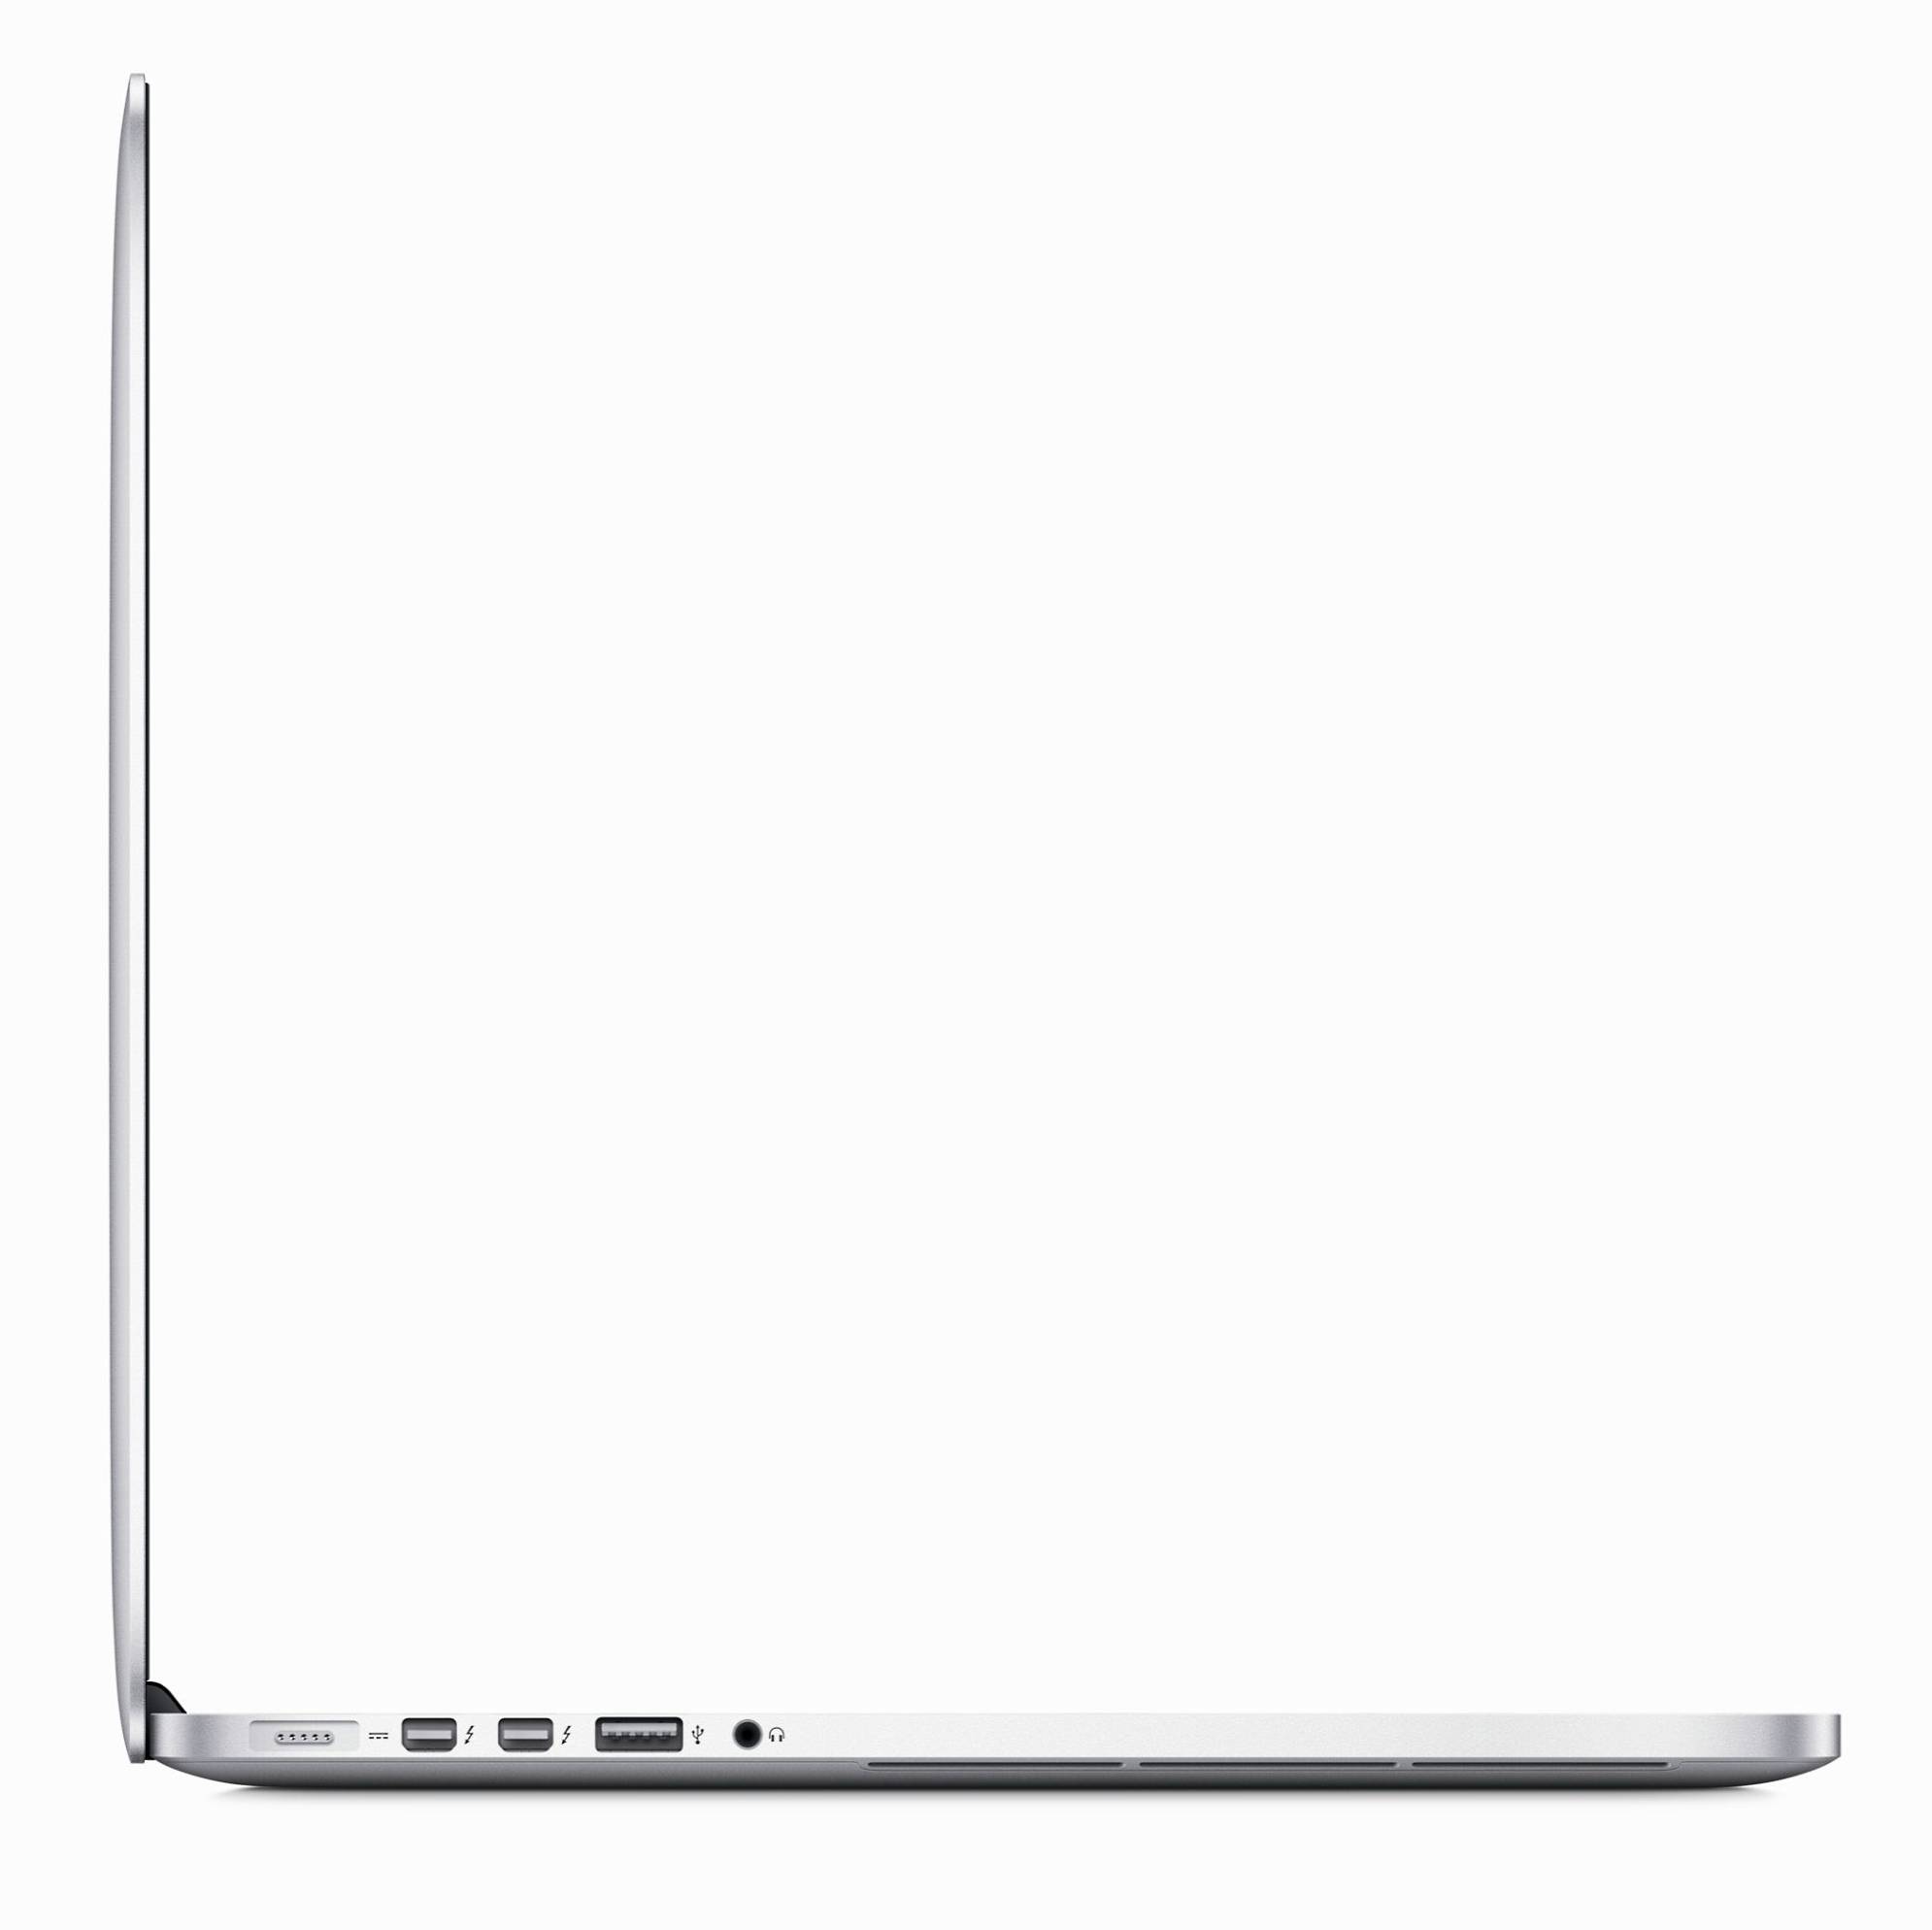 Restored Apple MacBook Pro 15.4" with Retina Display i7 8GB 256GB ME293LL/A in Silver (Refurbished) - image 2 of 3